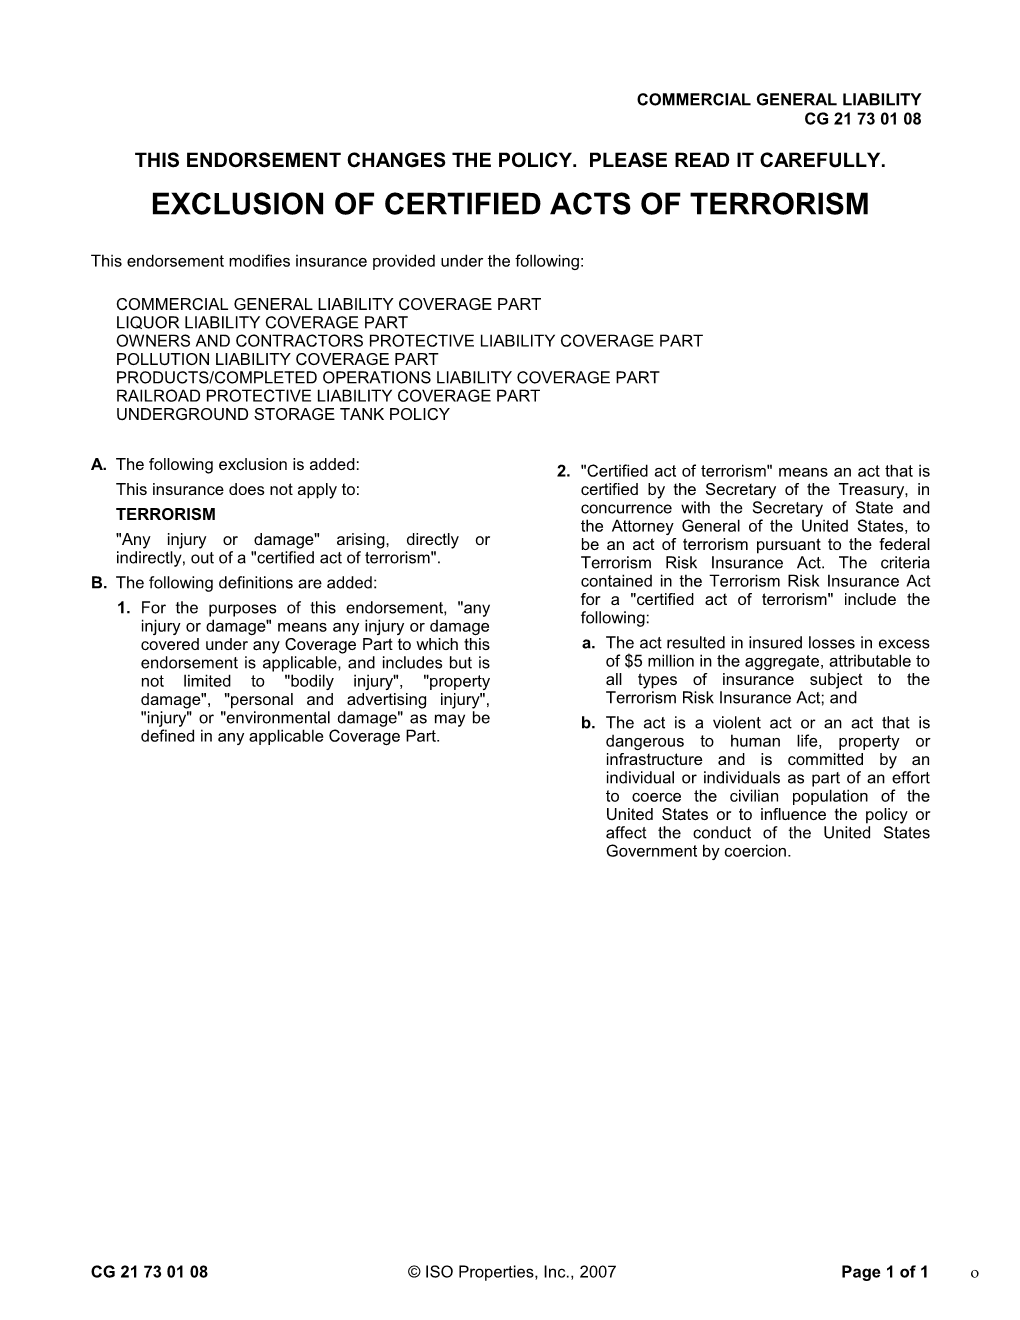 Exclusion of Certified Acts of Terrorism